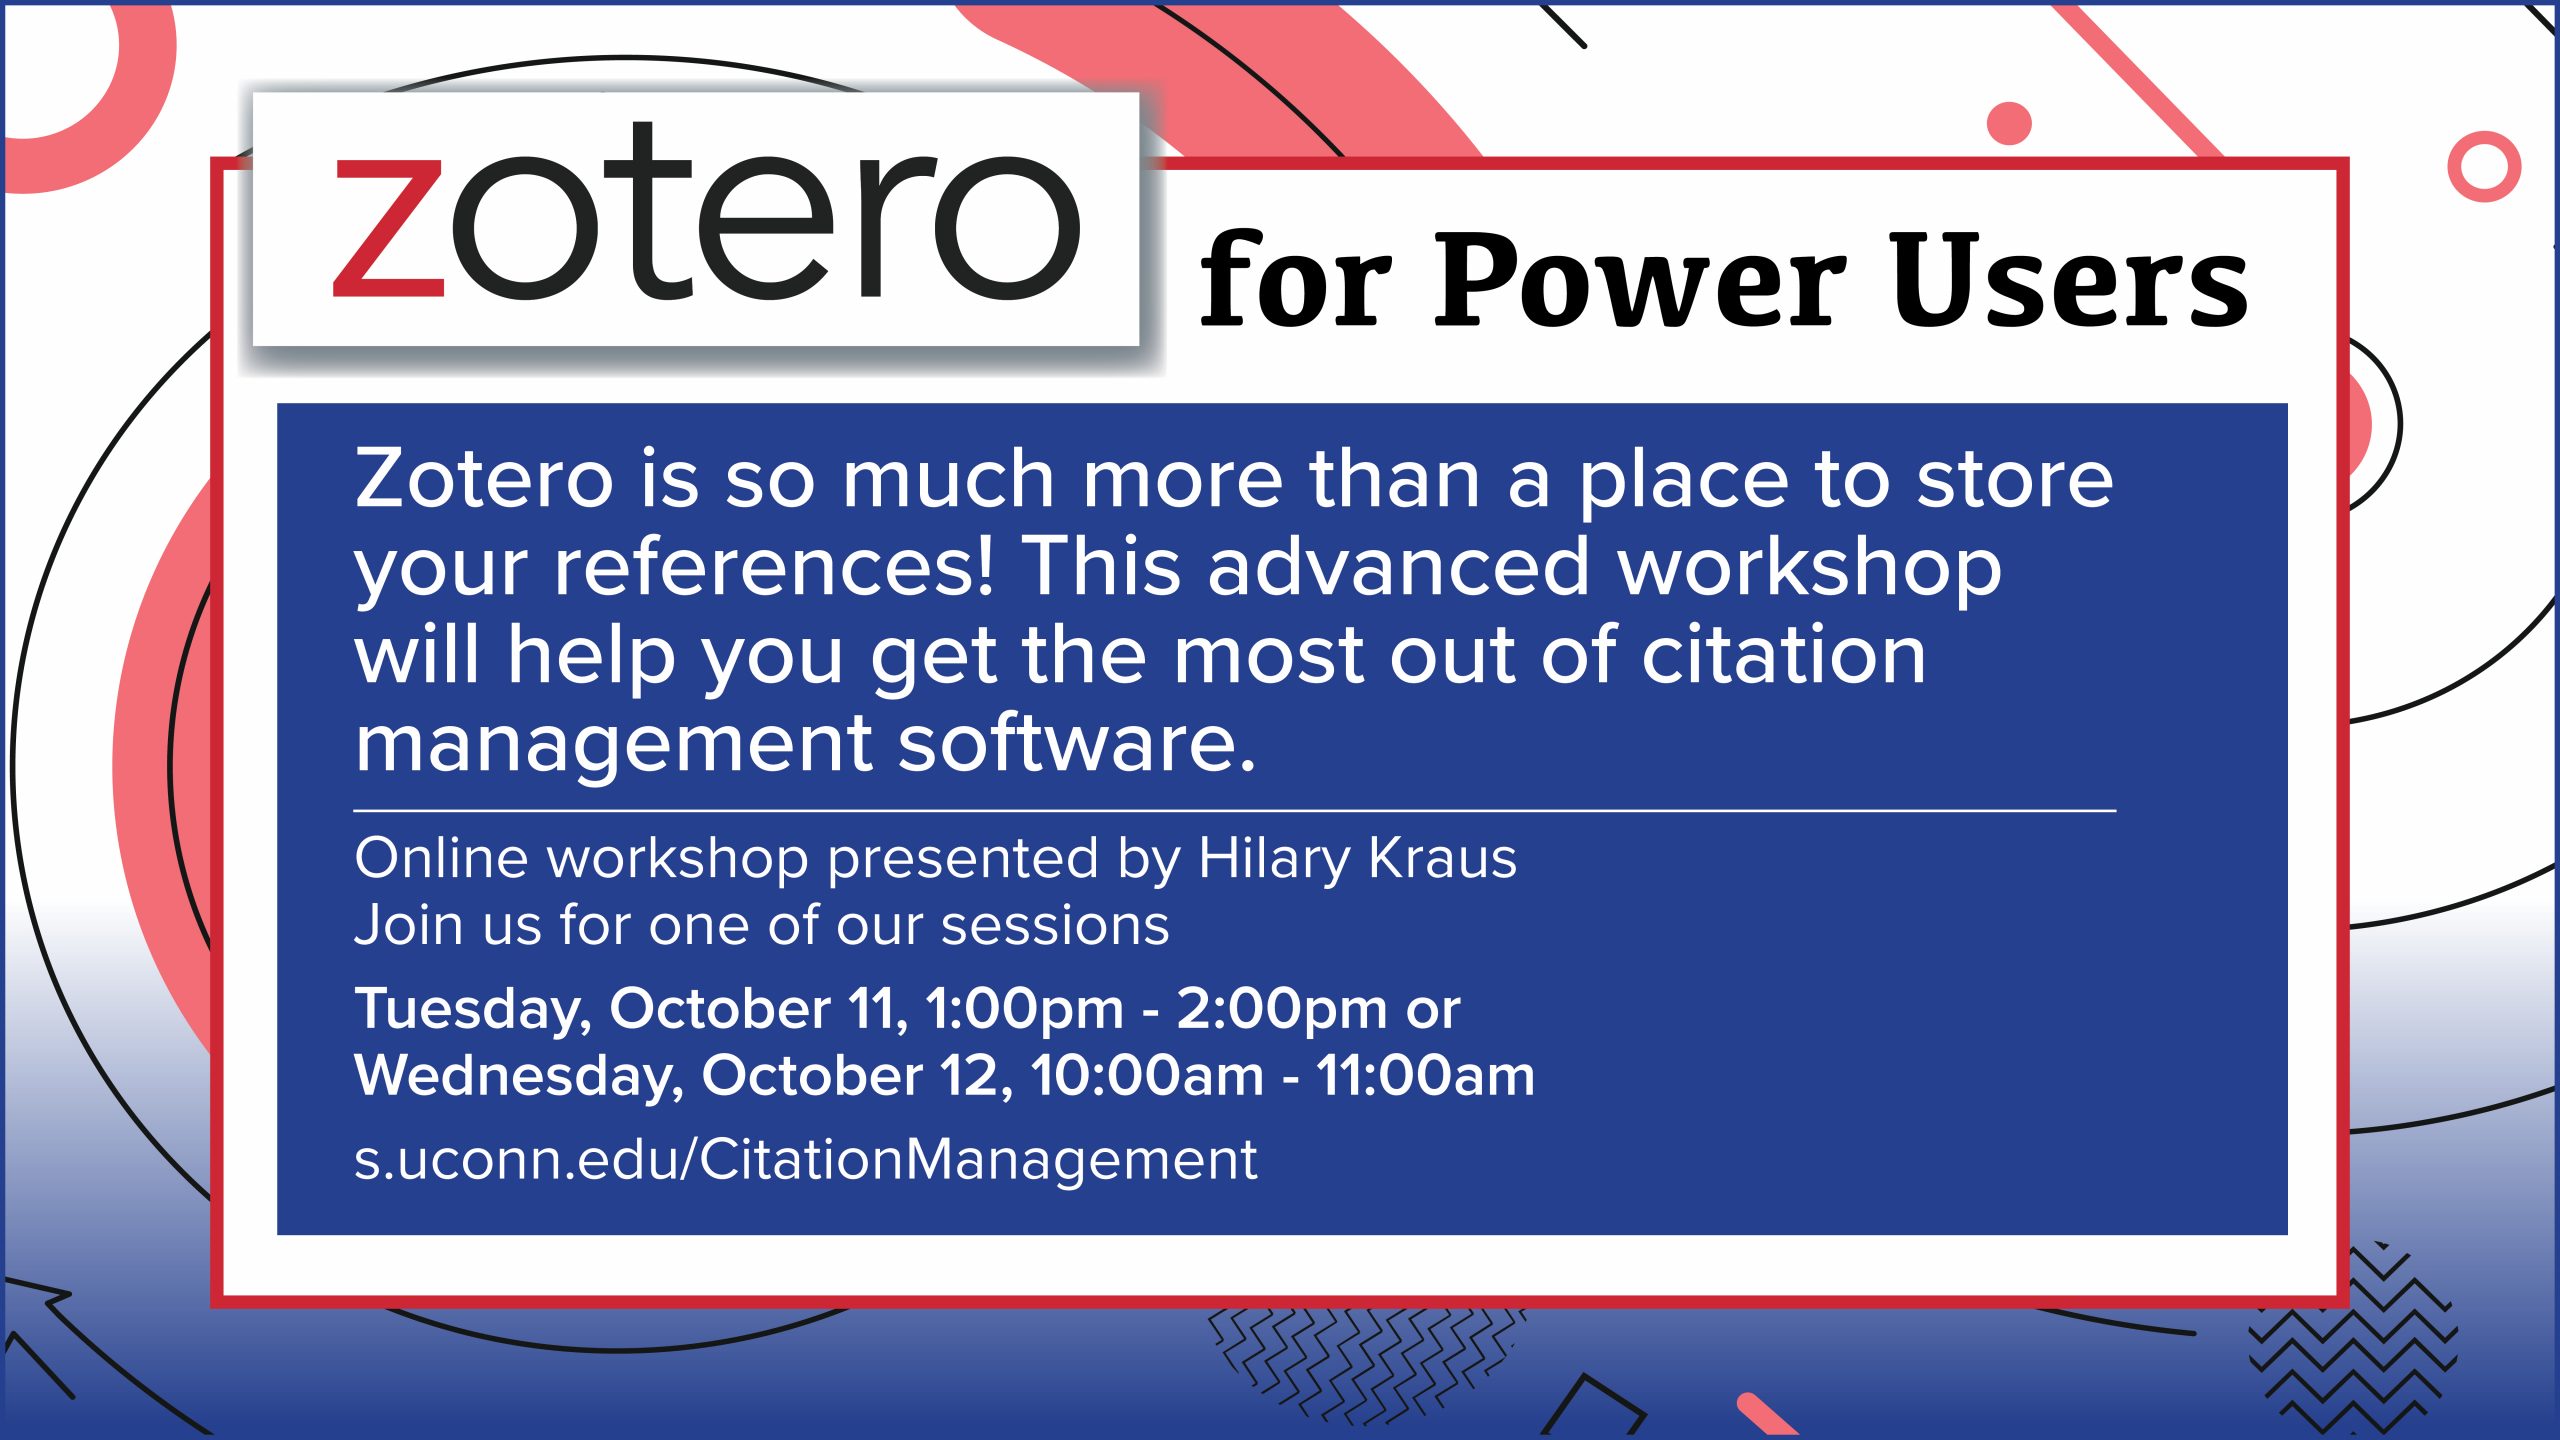 Marketing image with red, white and blue abstract shapes in the background with the text, “Zotero for power users. Zotero is so much more than a place to store your references! This advanced workshop will help you get the most out of citation management software. Online workshop presented by Hilary Kraus. Join us for one of our sessions. Tuesday, October 11, 1:00pm - 2:00pm or Wednesday, October 12, 10:00am - 11:00am. s.uconn.edu/CitationManagement.”